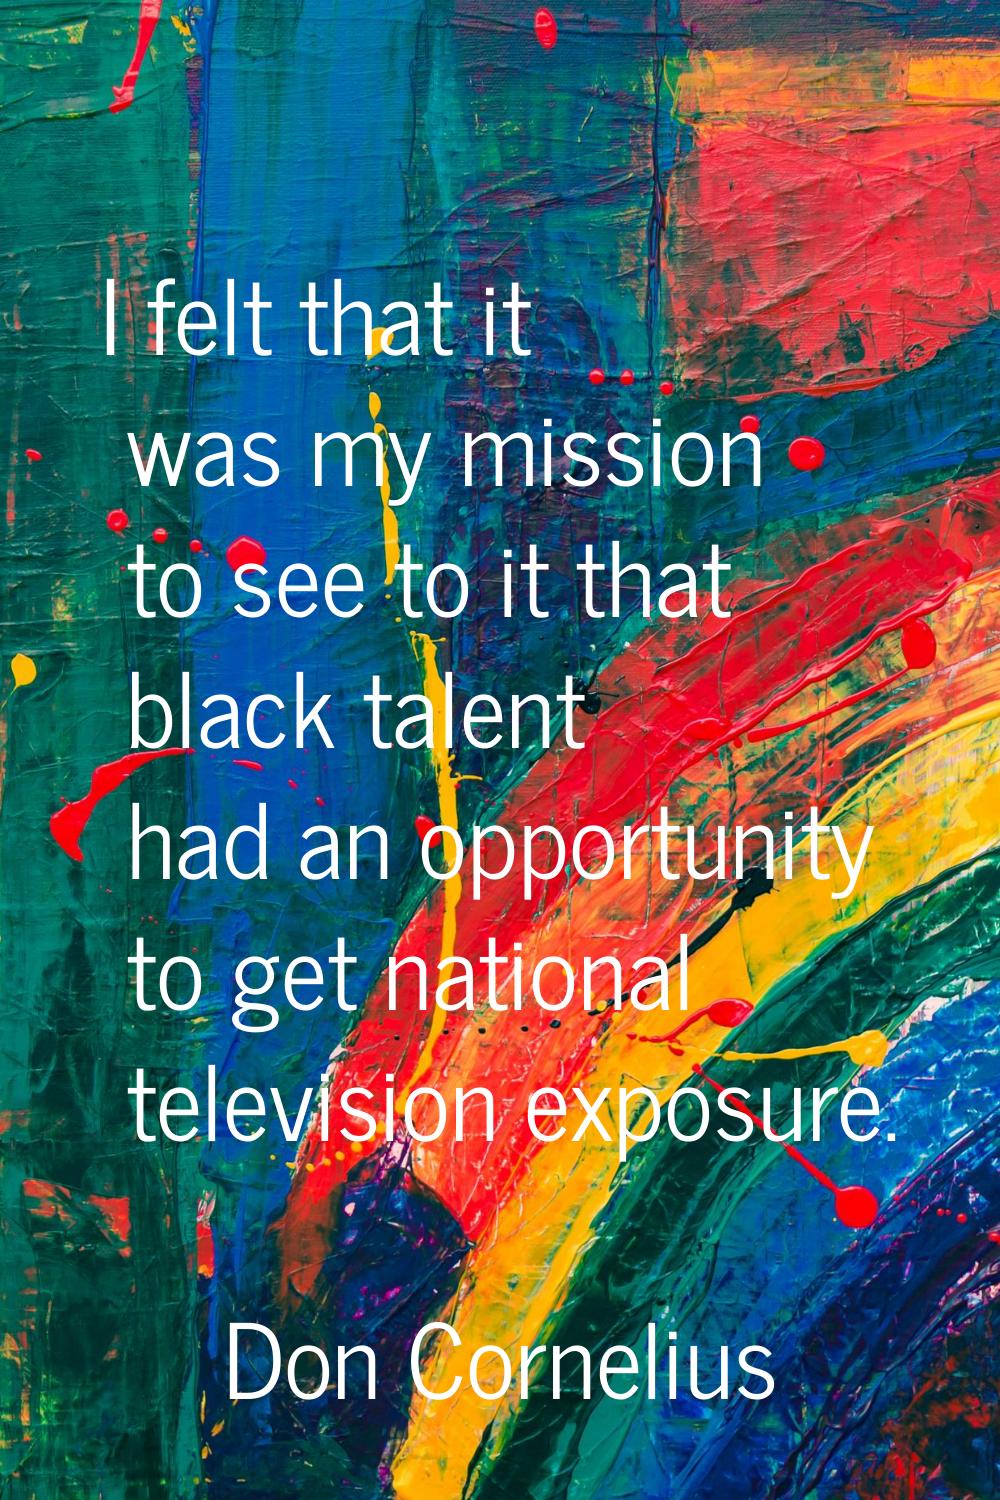 I felt that it was my mission to see to it that black talent had an opportunity to get national tel